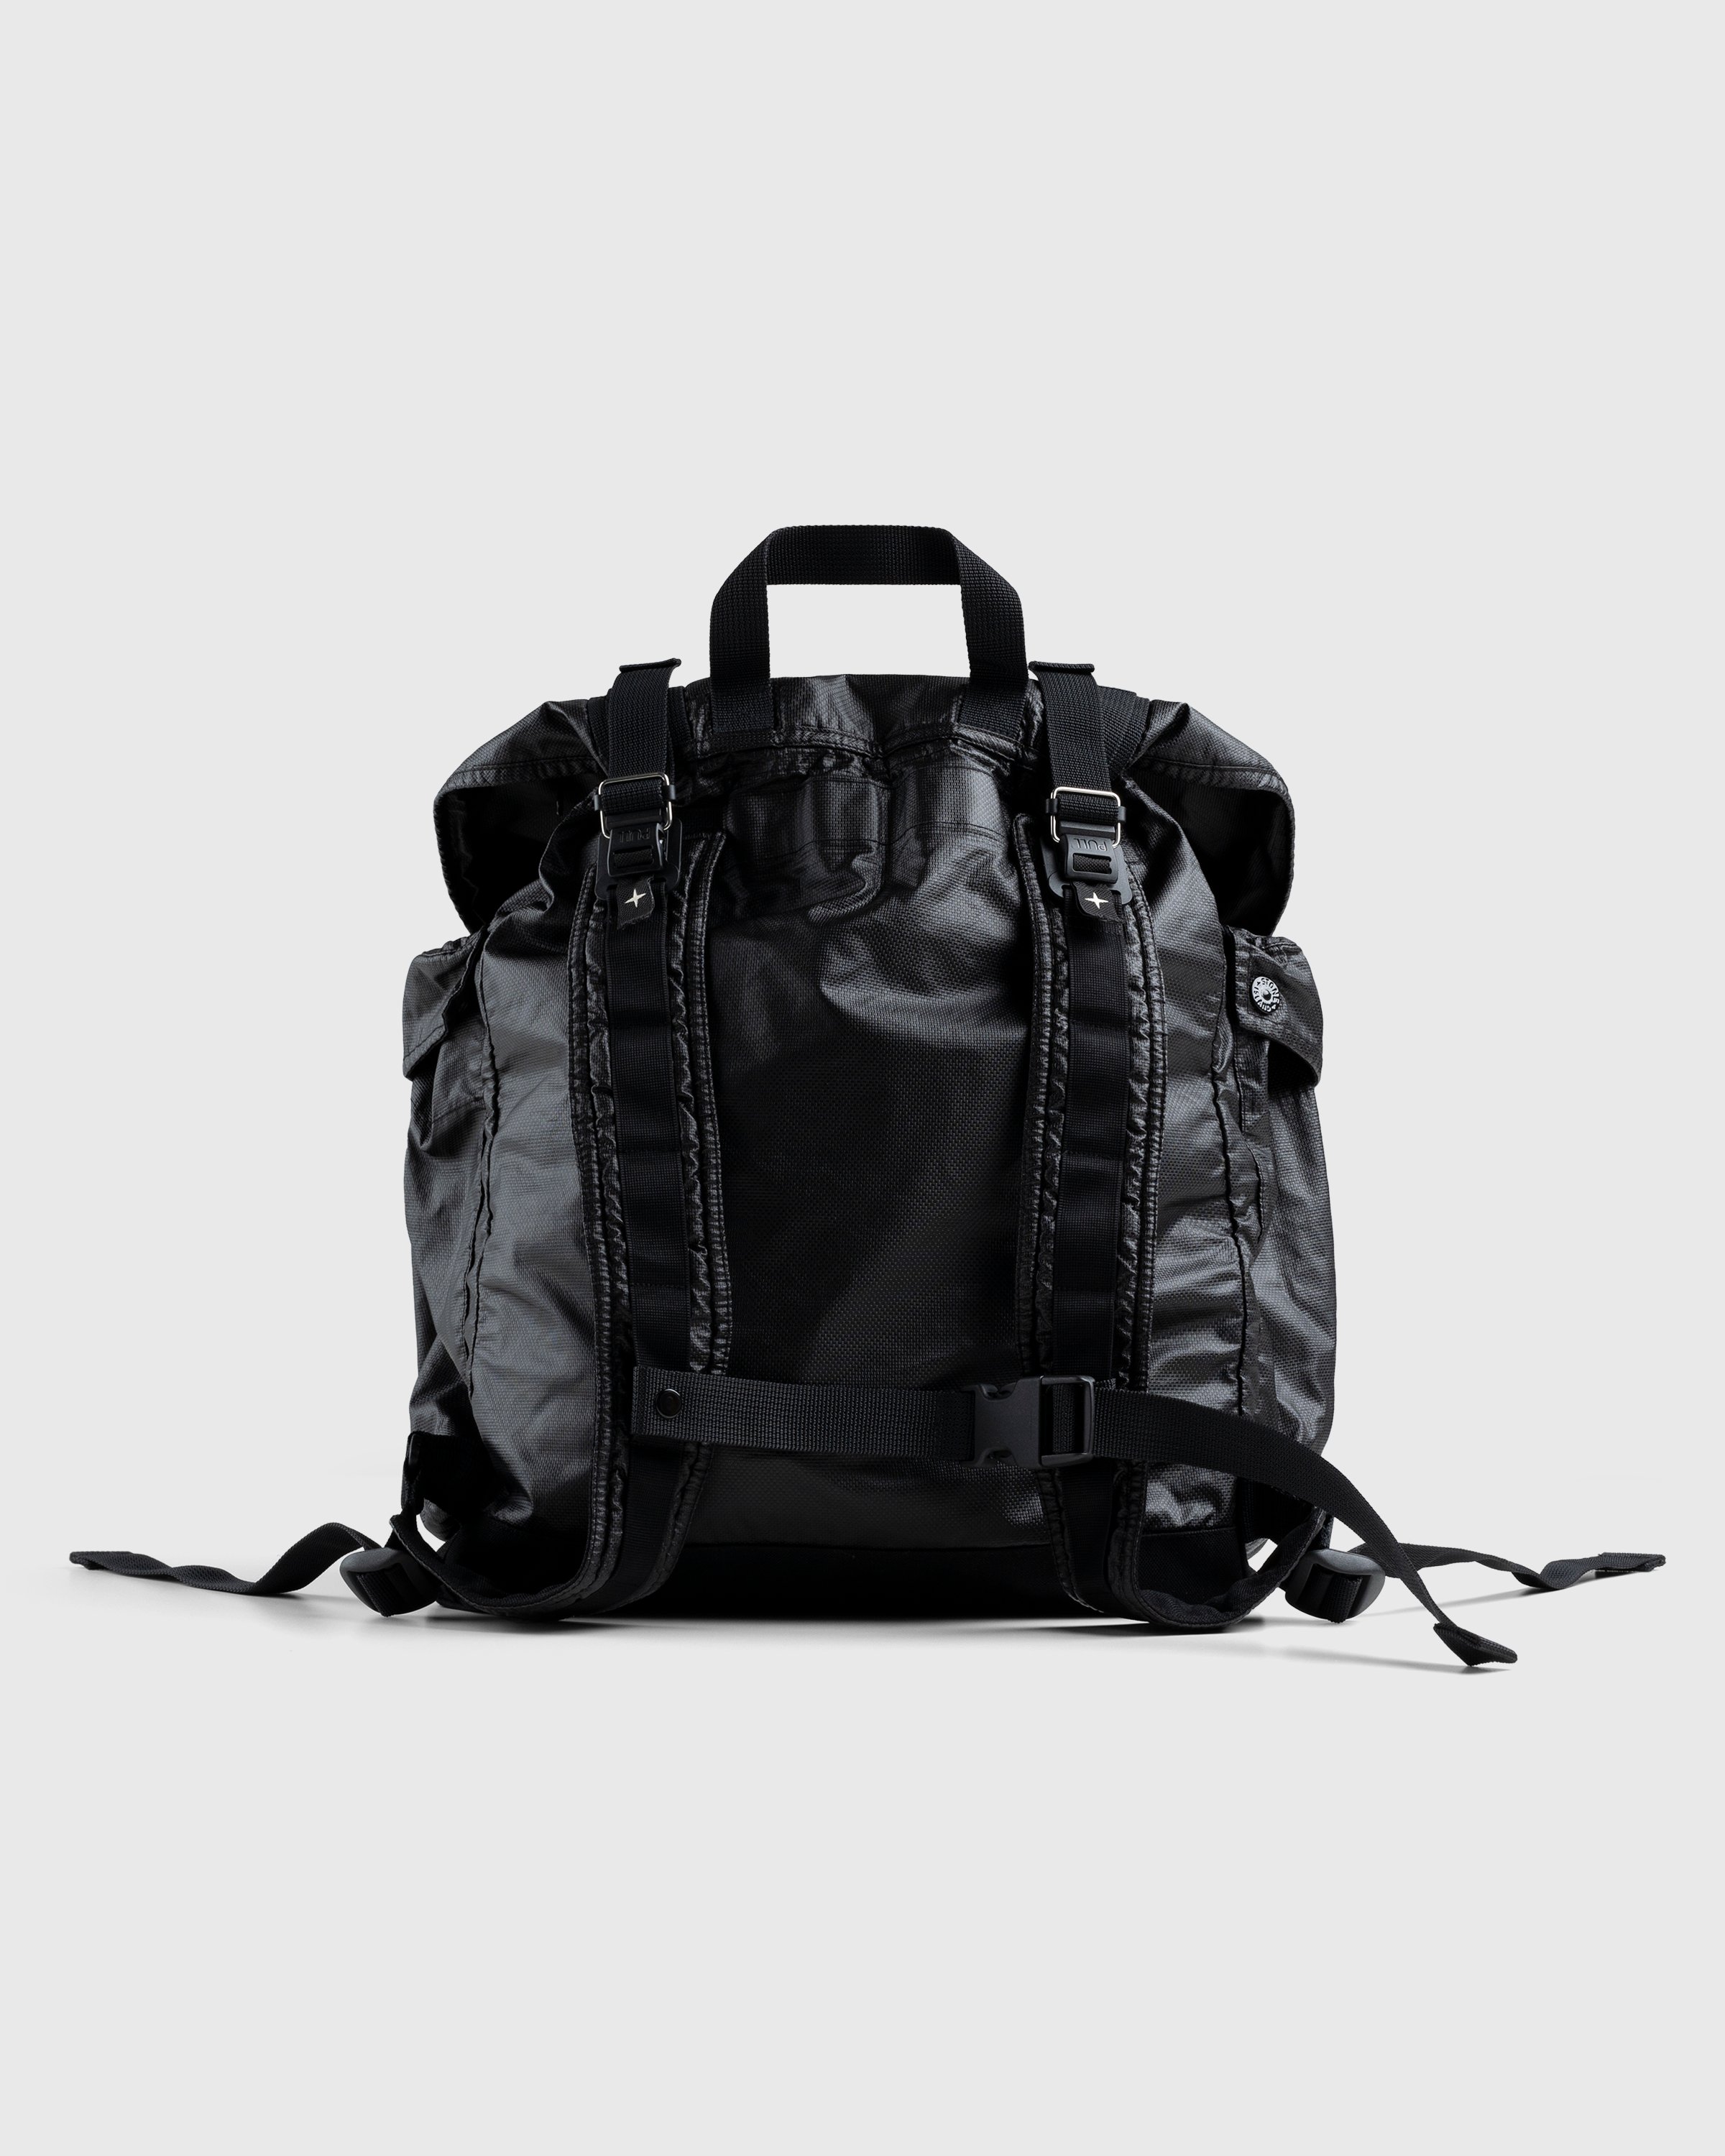 Stone Island - 90370 Dyed Backpack Black - Accessories - Black - Image 2